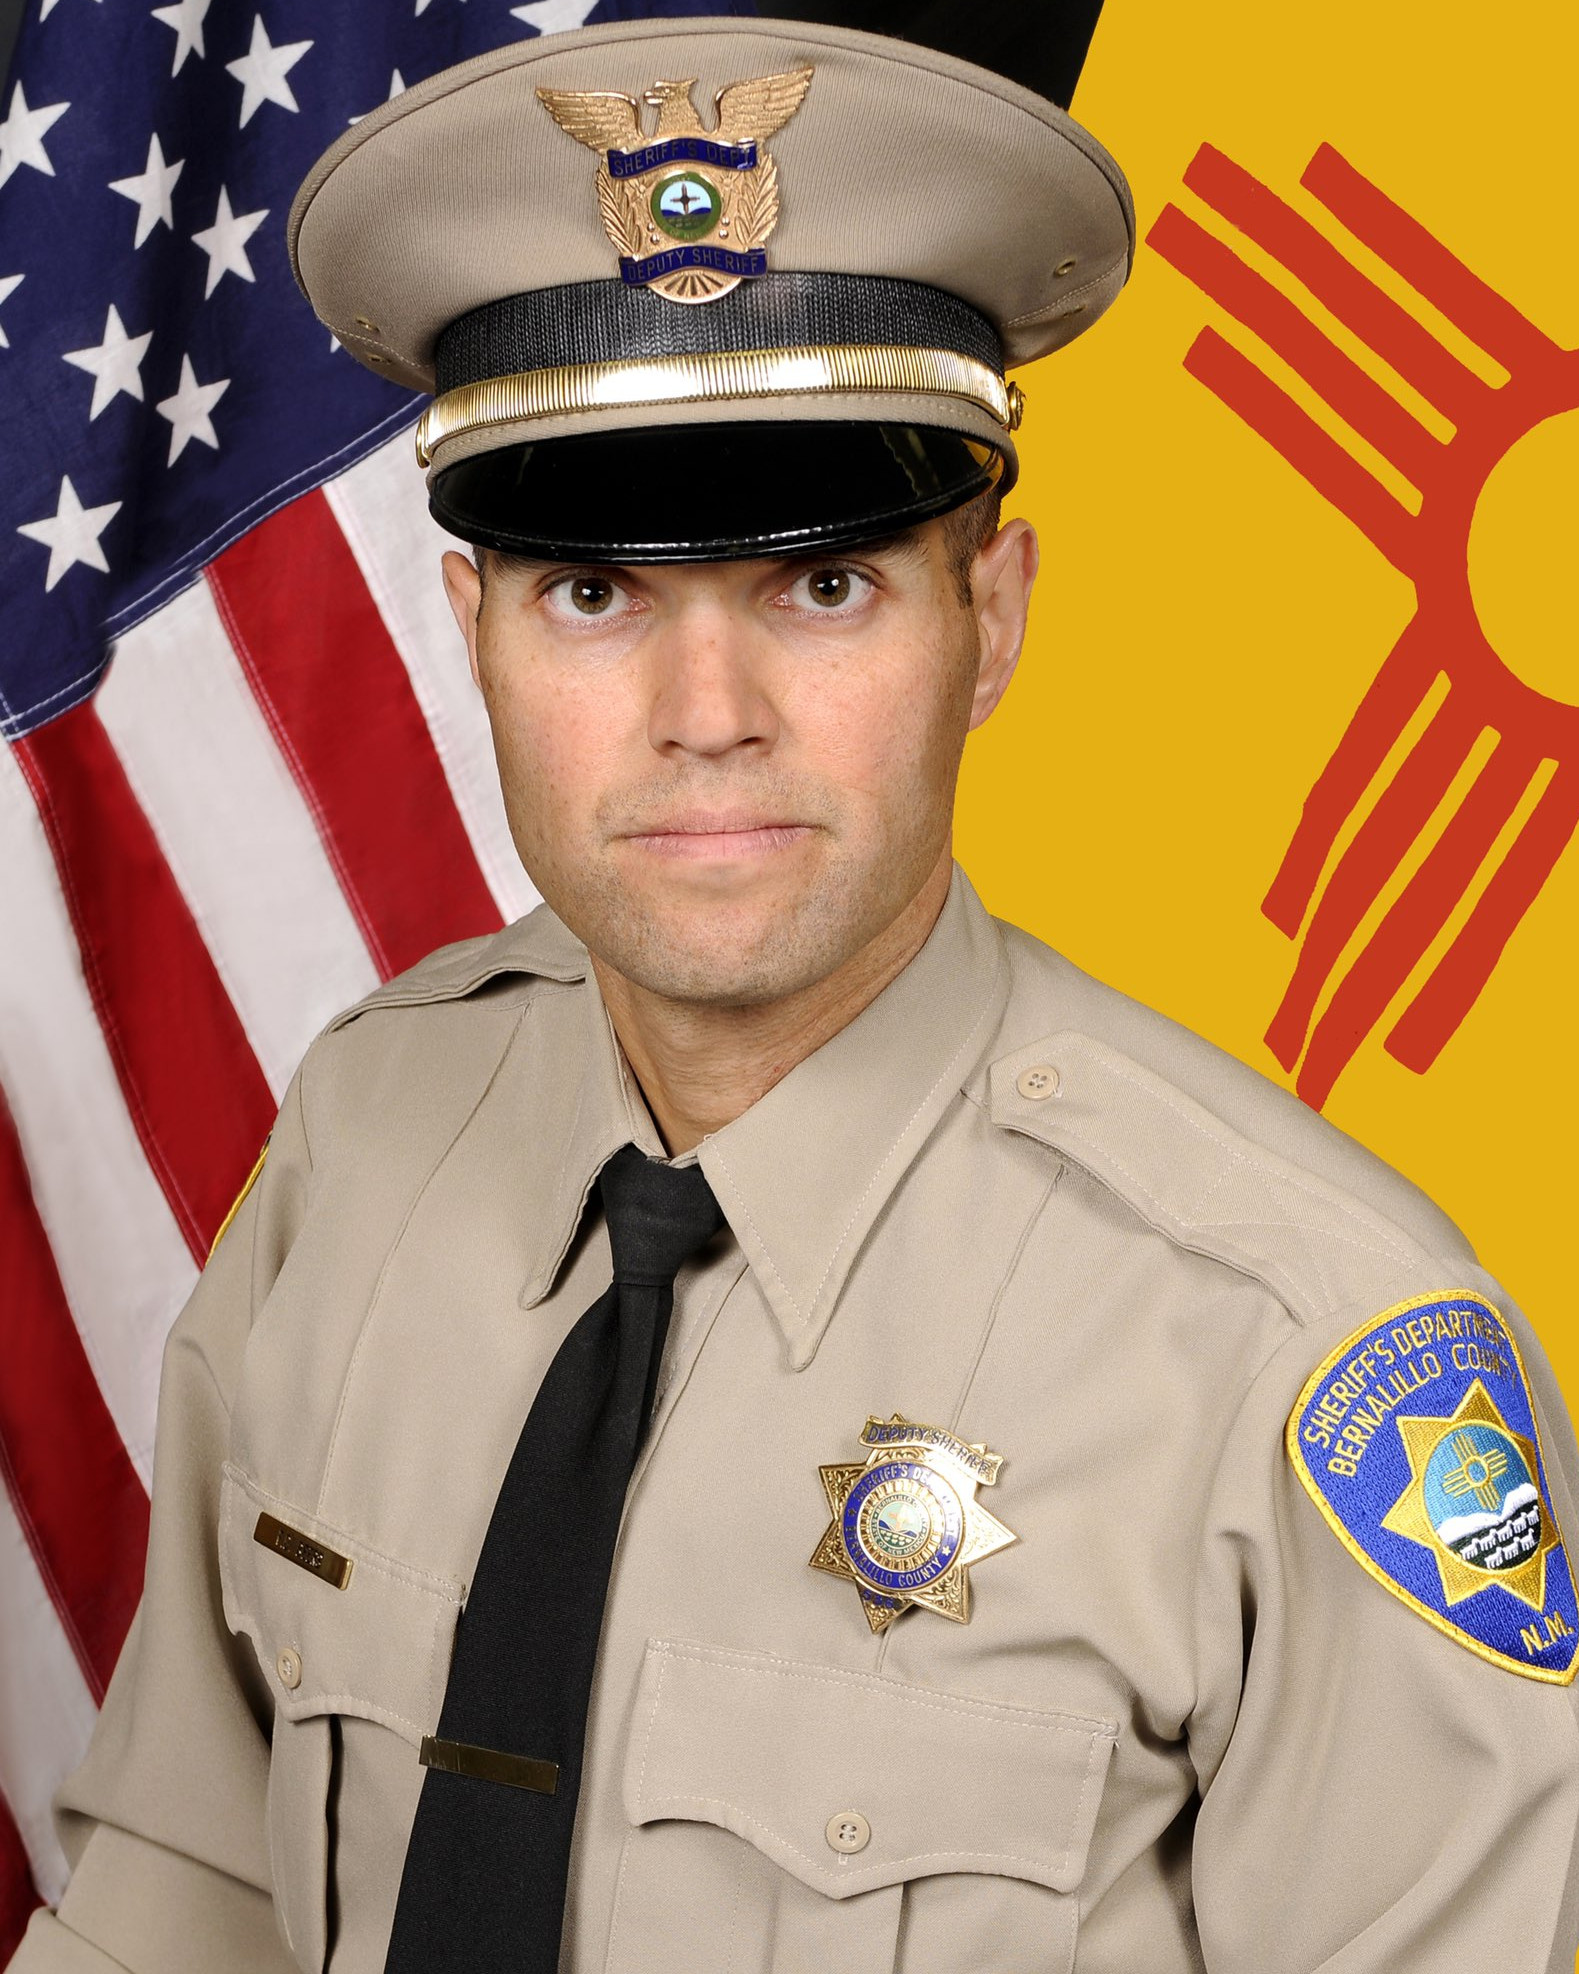 Lieutenant Fred Beers | Bernalillo County Sheriff's Office, New Mexico